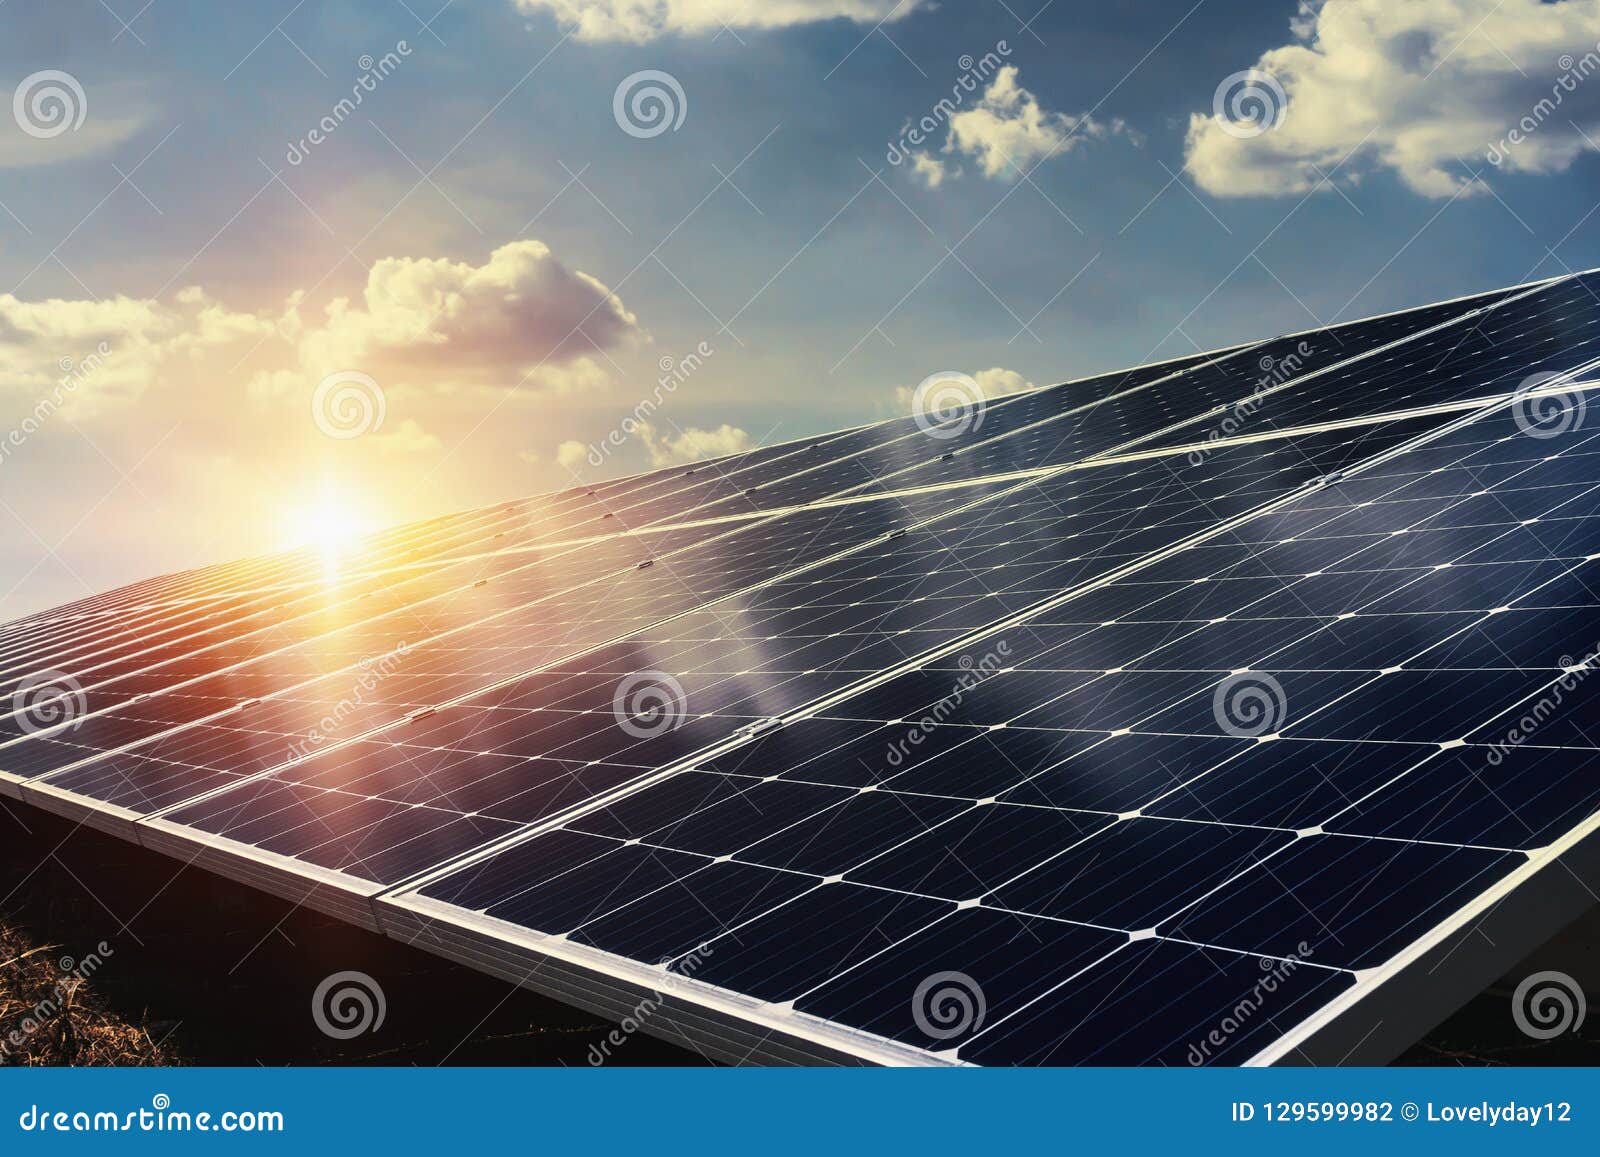 solar panel with sunlight and blue sky background. concept clean